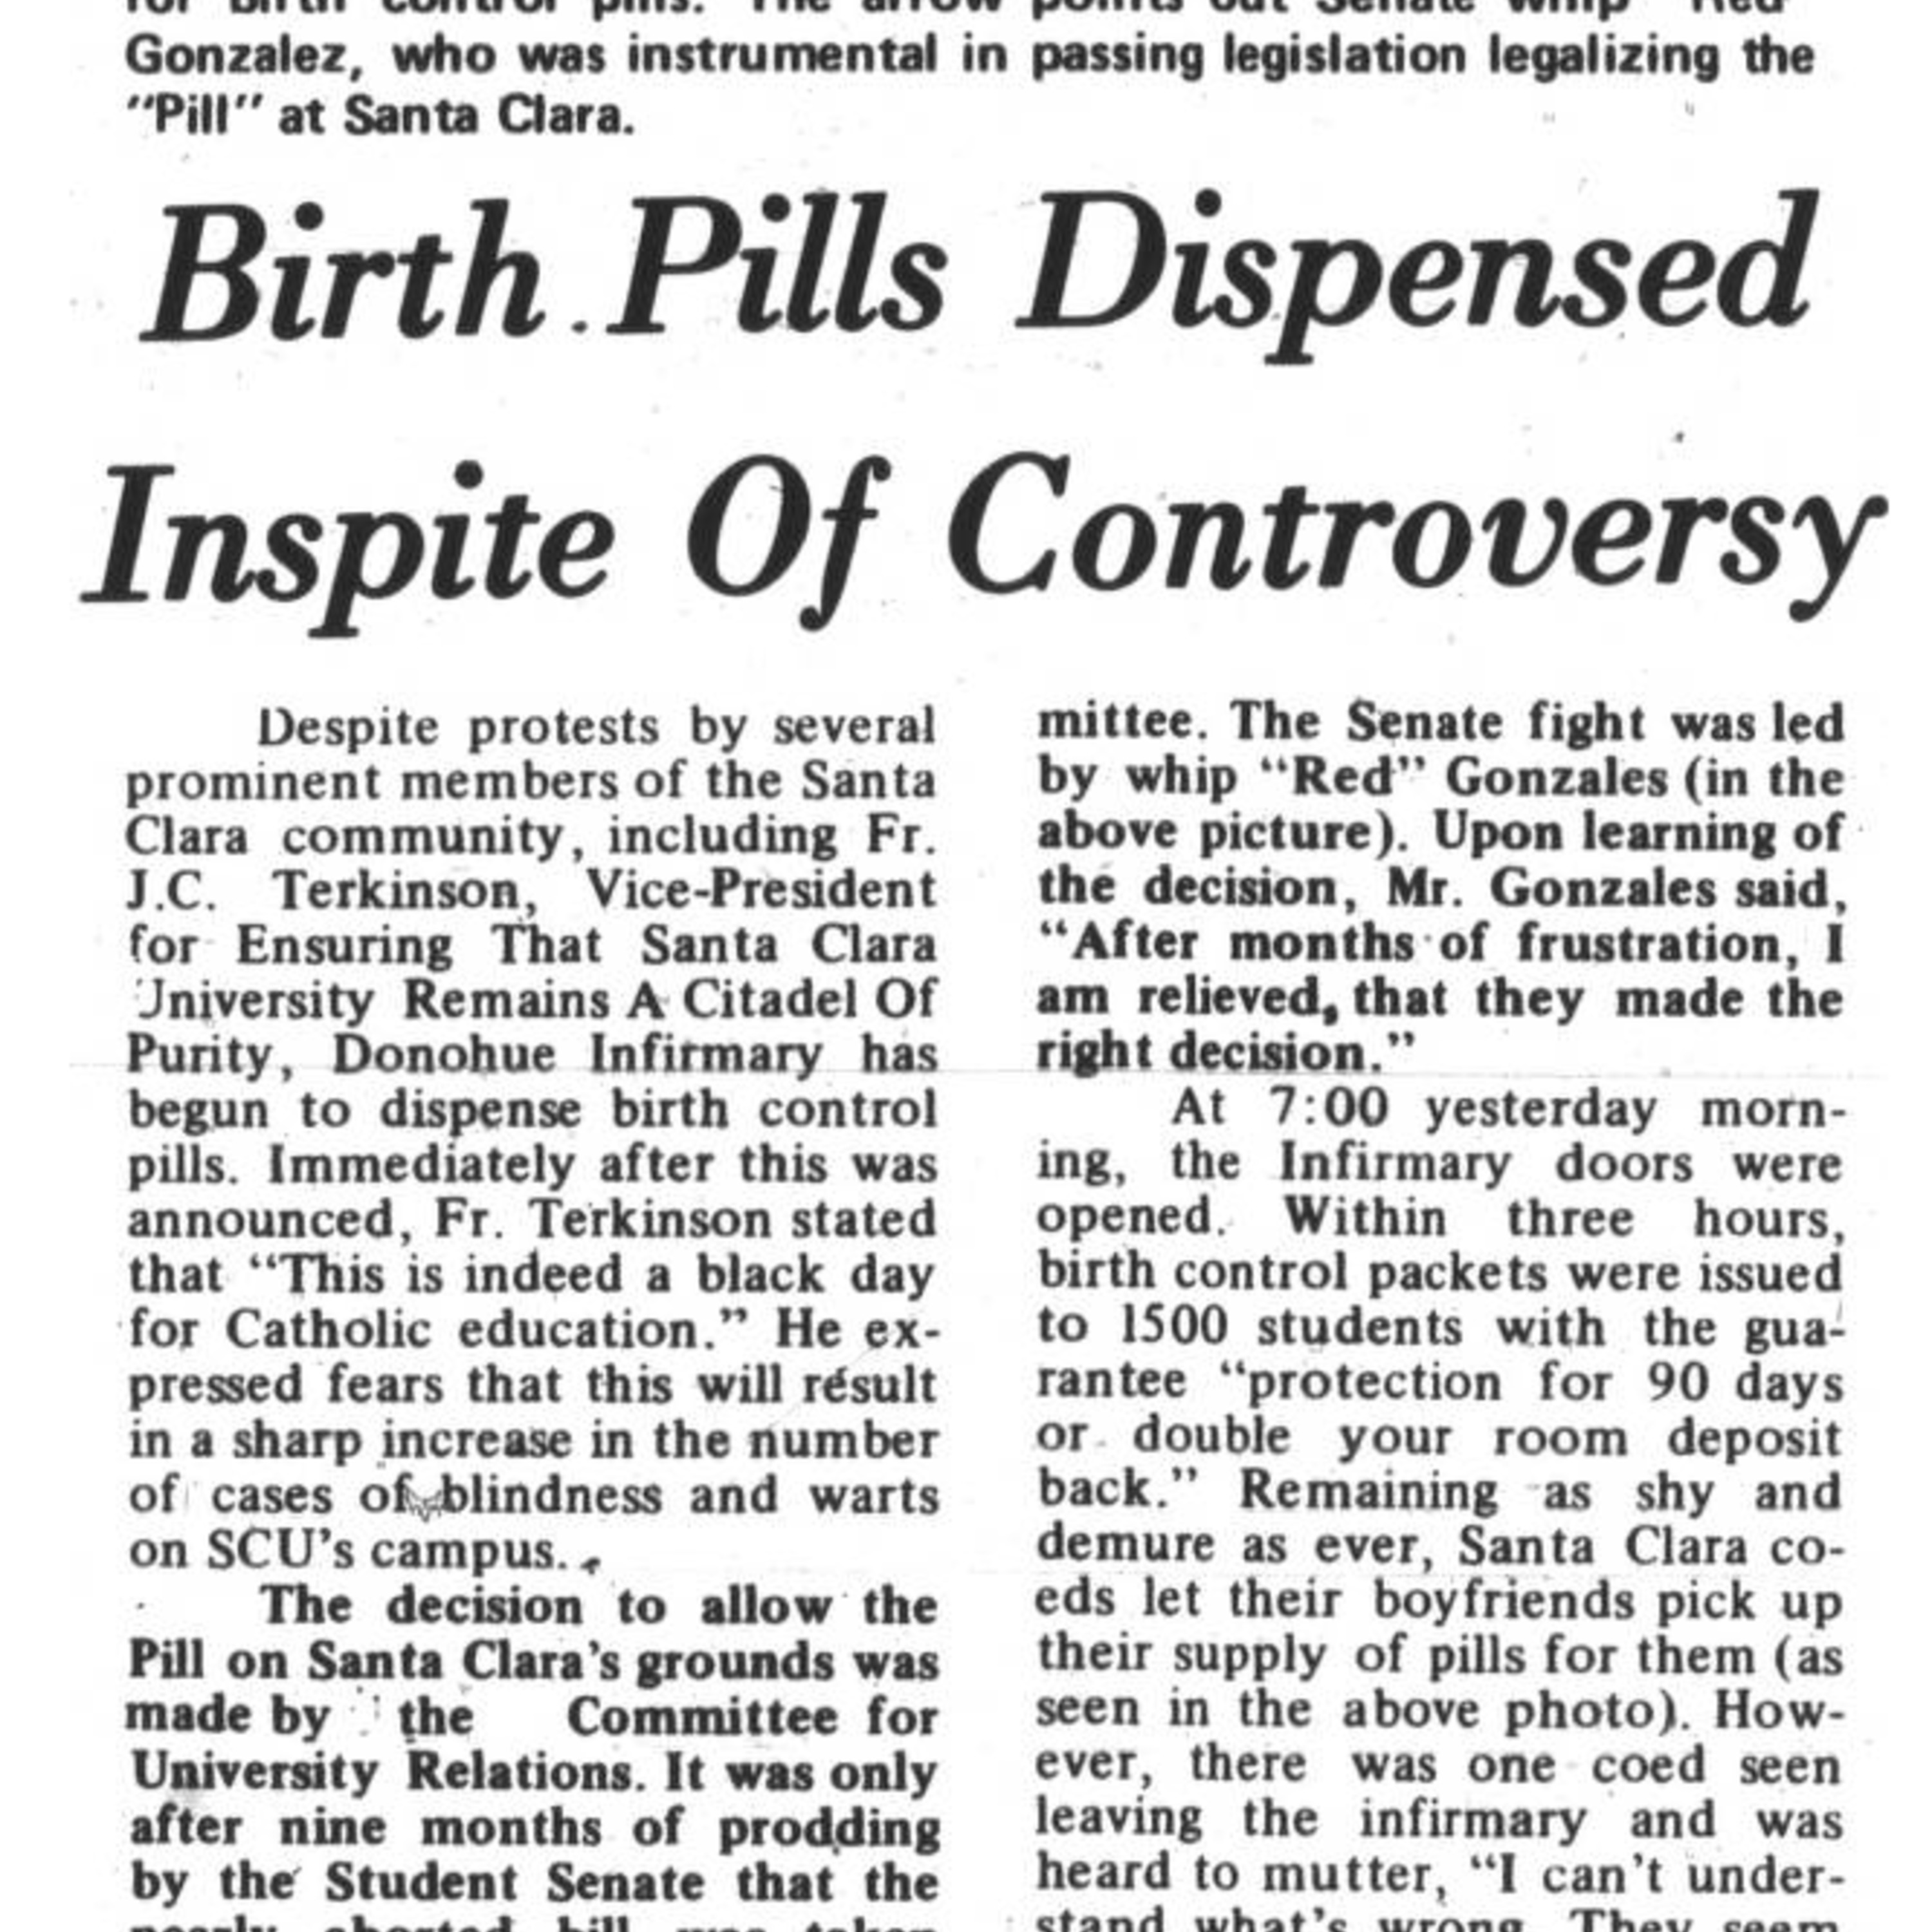 Birth Pills Dispensed in Face of Controversy, 1971